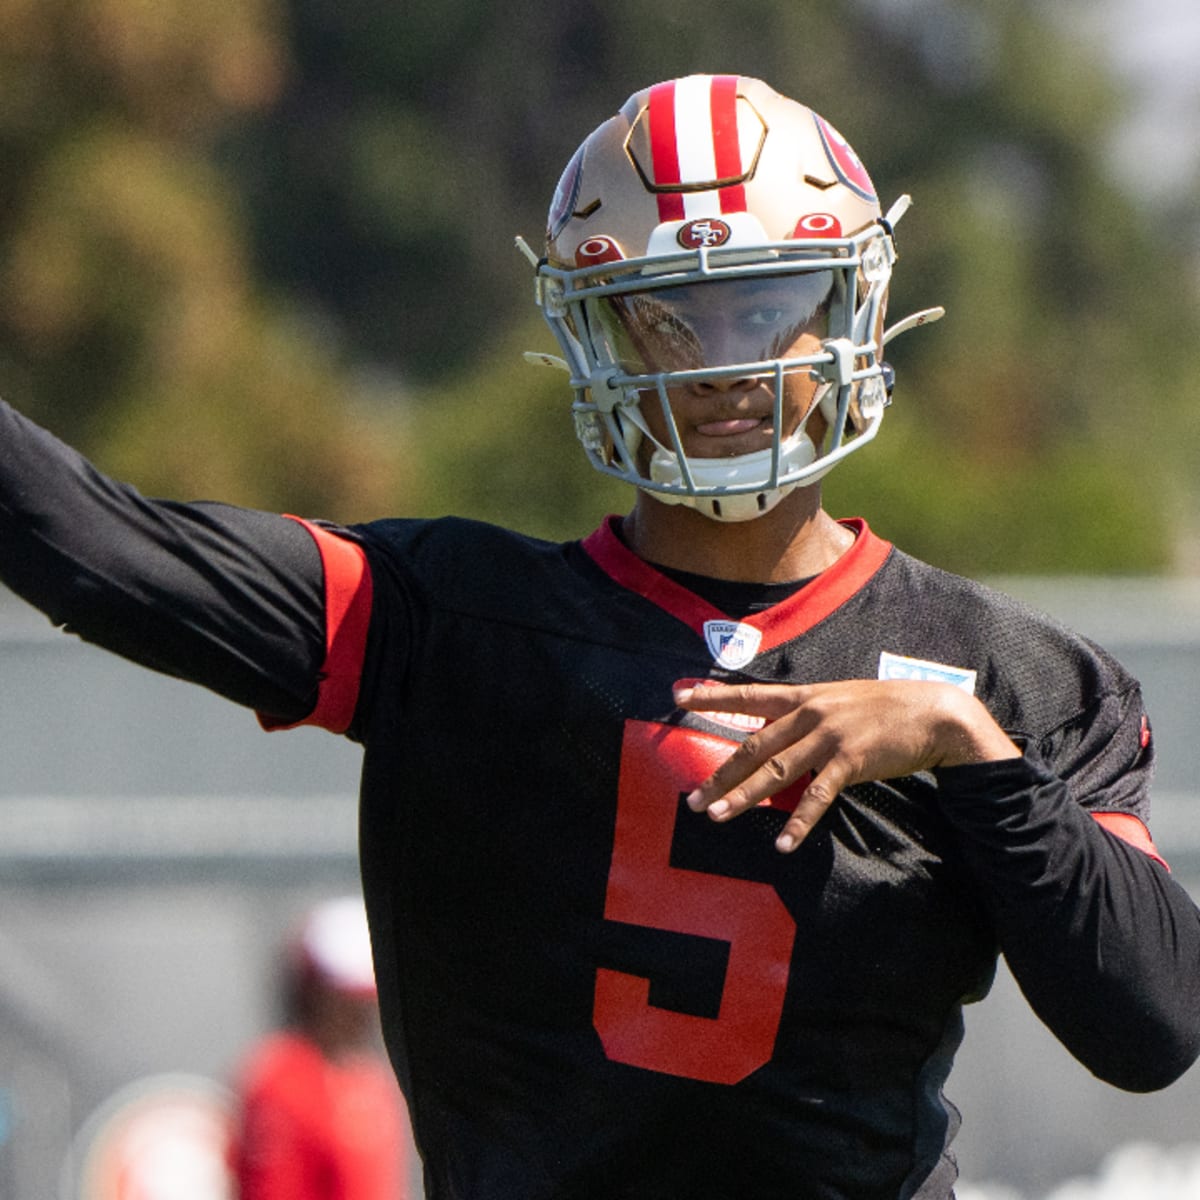 49ers camp: Top 5 observations in Monday's feisty padded practice